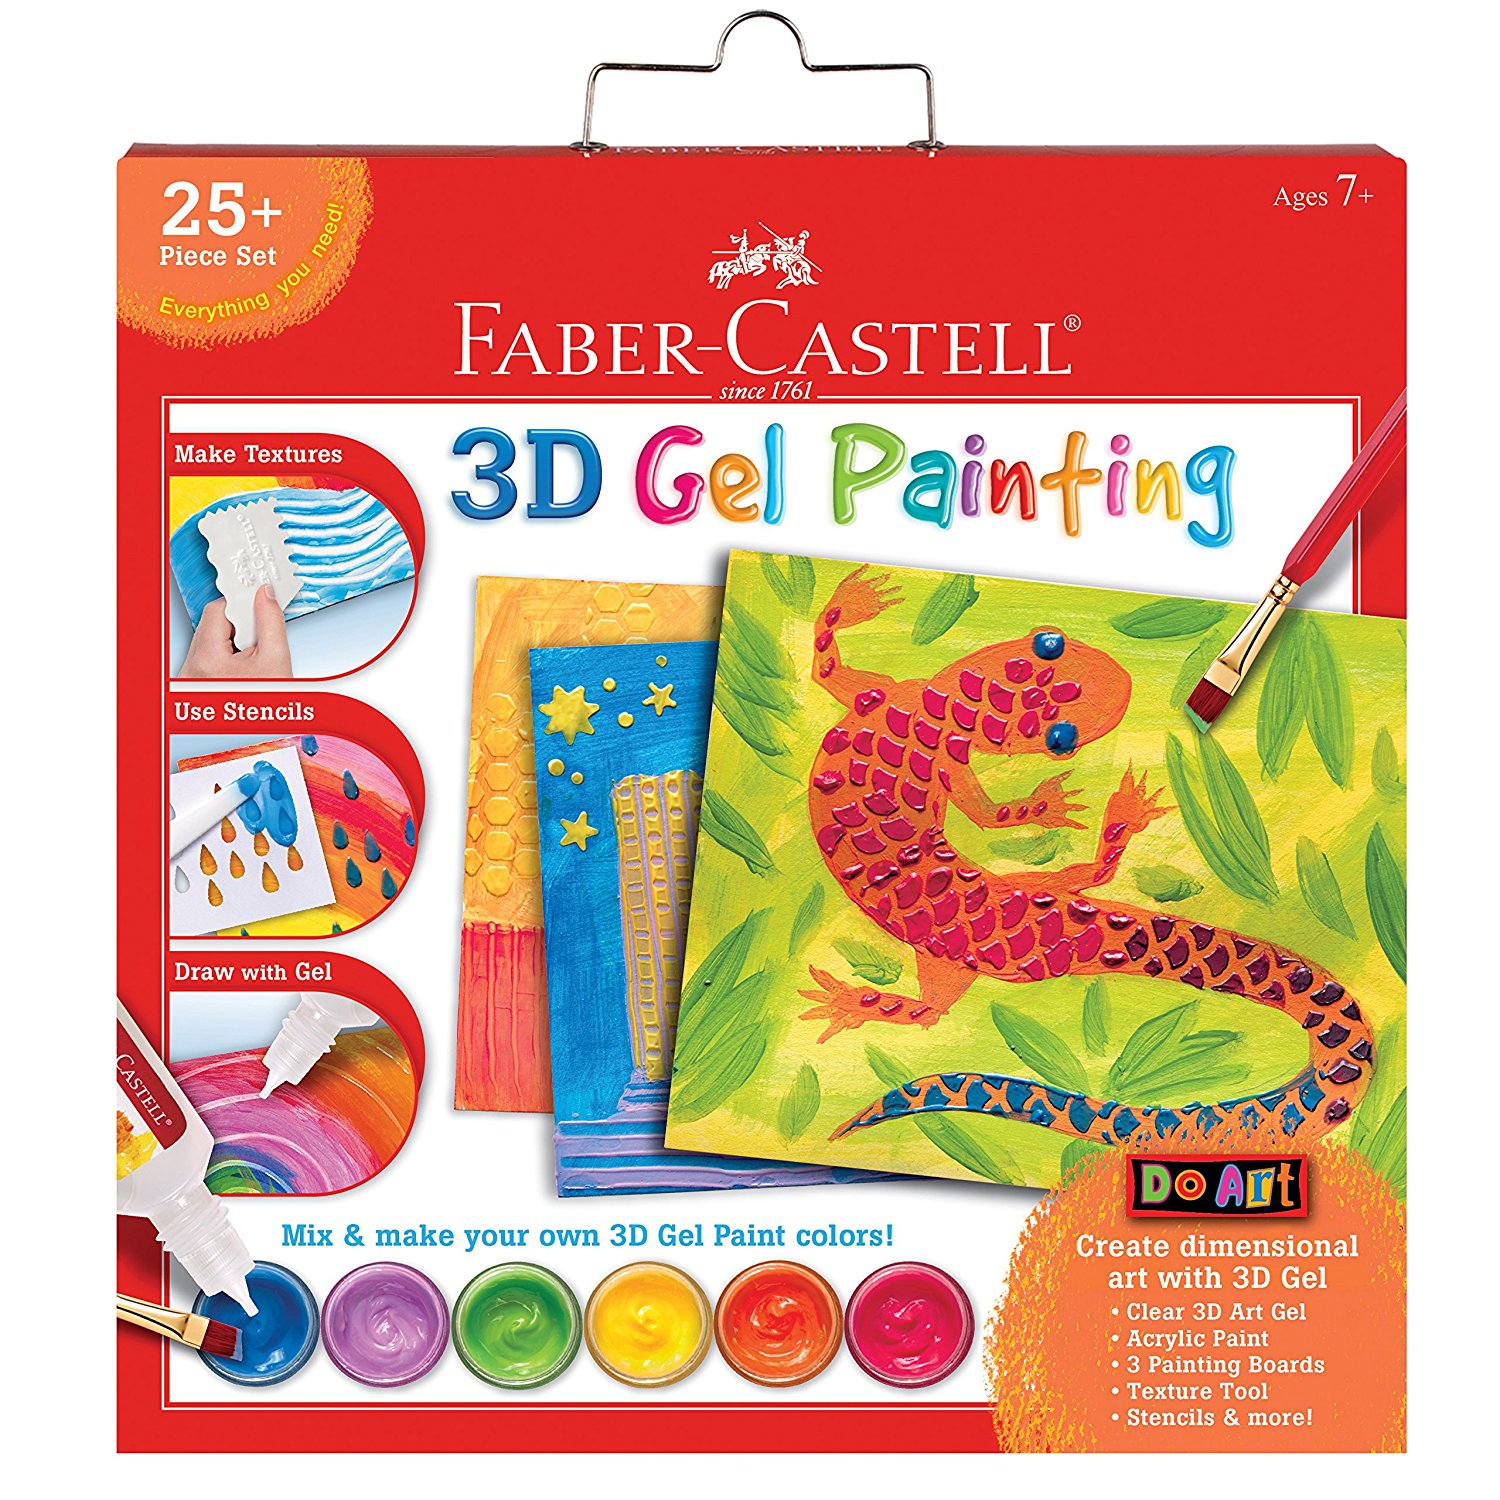 Premium Children's Art Products Your Kids Will Want!